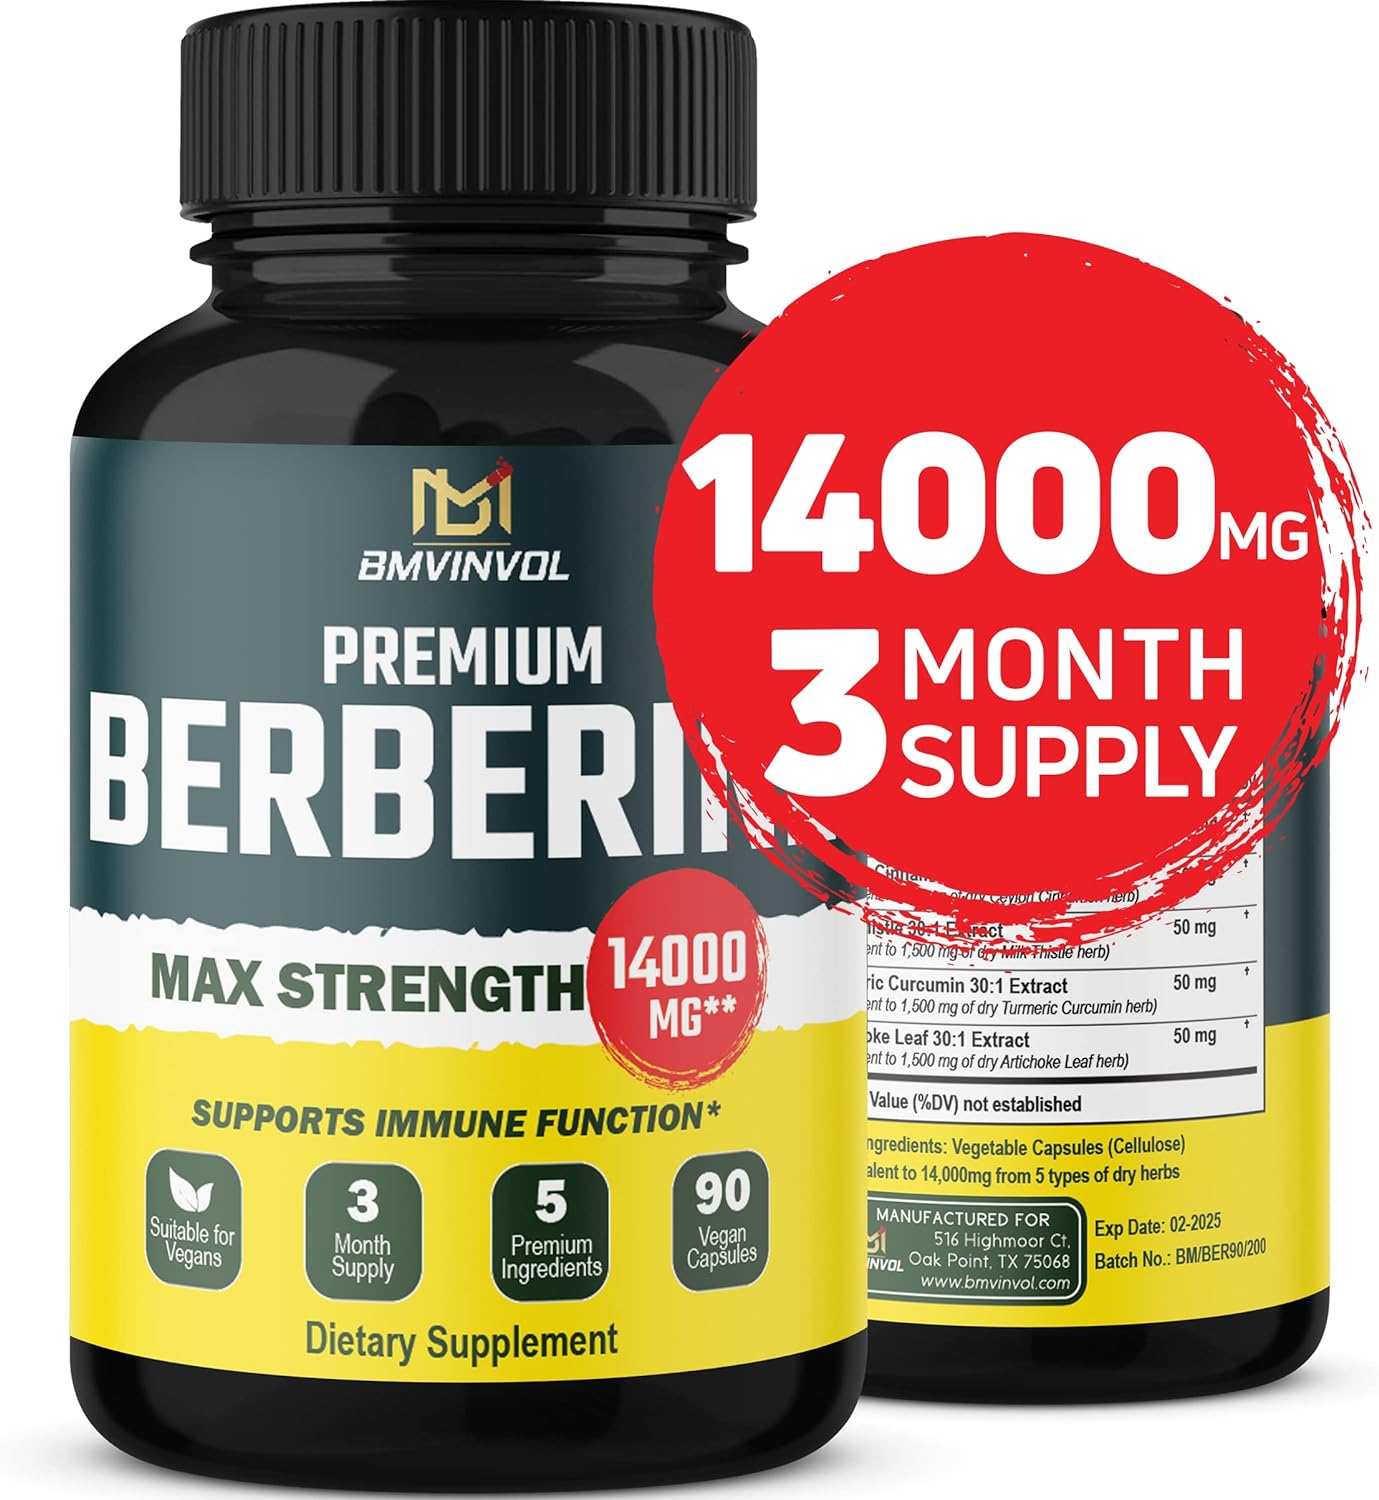 5-in-1 Berberine 14000mg with Ceylon Cinnamon Milk Thistle Turmeric Artichoke - 30:1 Concentrated Formula Berberine - 3 Month Supply For High Potency - Immune Heart Support